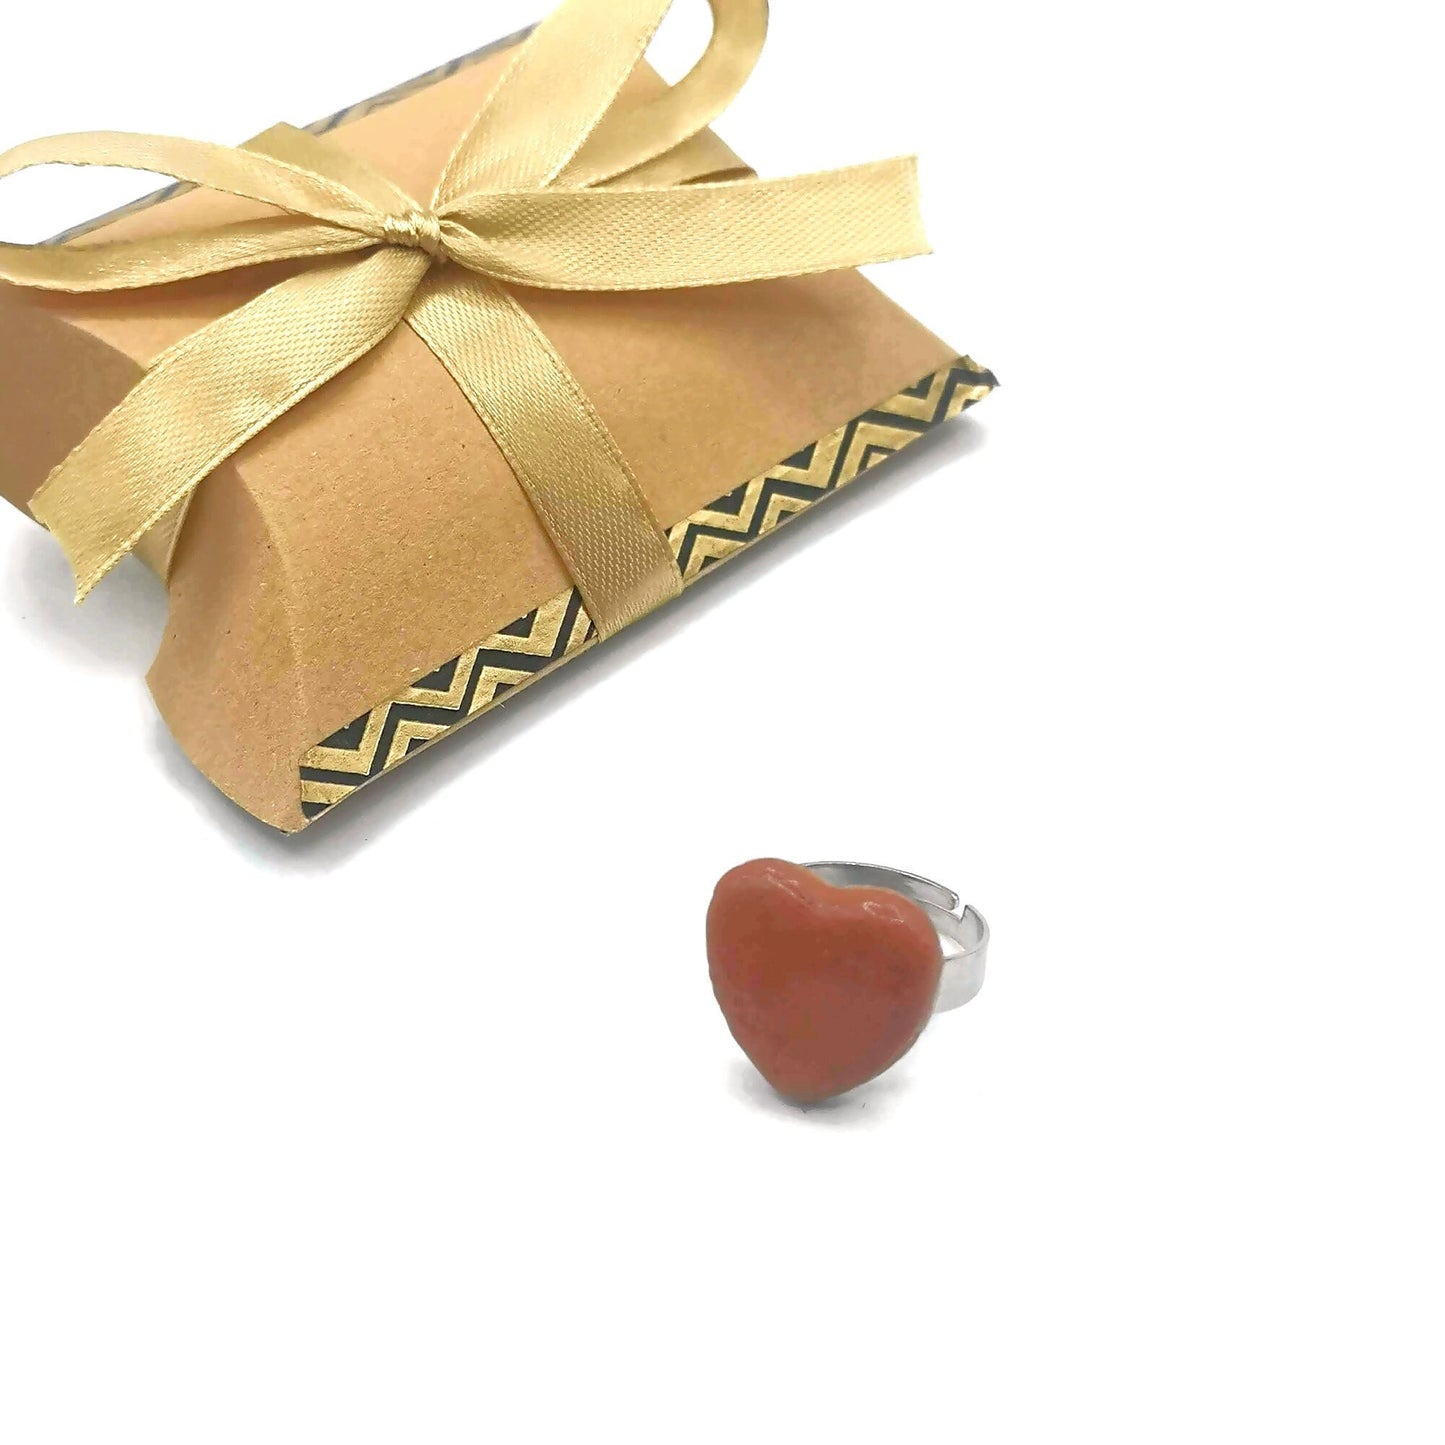 Handmade Large Statement Terracotta Heart Ring For Women, Unique Stainless Steel Adjustable Ring, Best Birthday Gifts For Her - Ceramica Ana Rafael